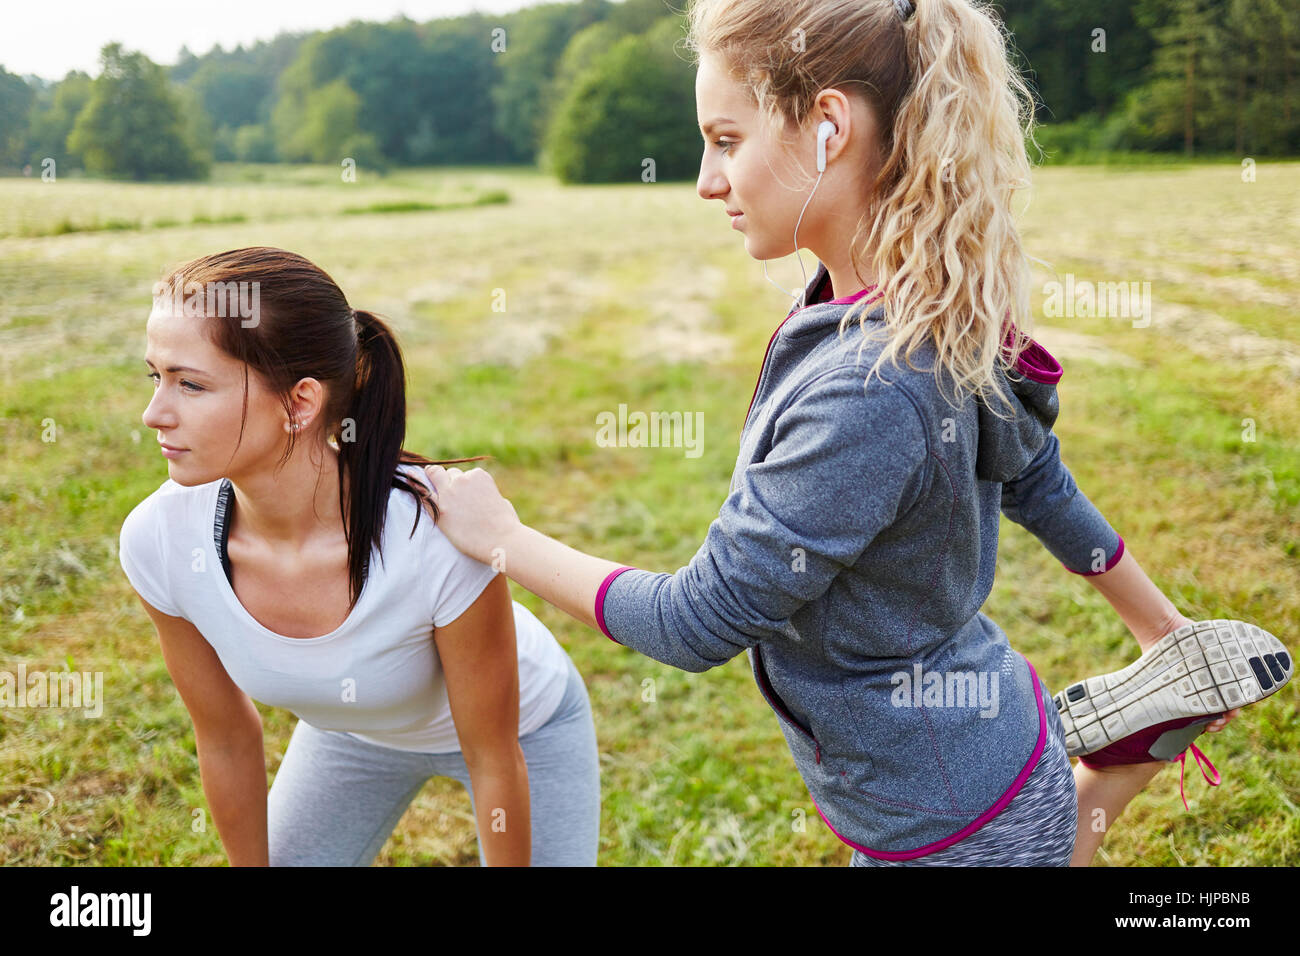 Two women stretching during fitness workout Stock Photo